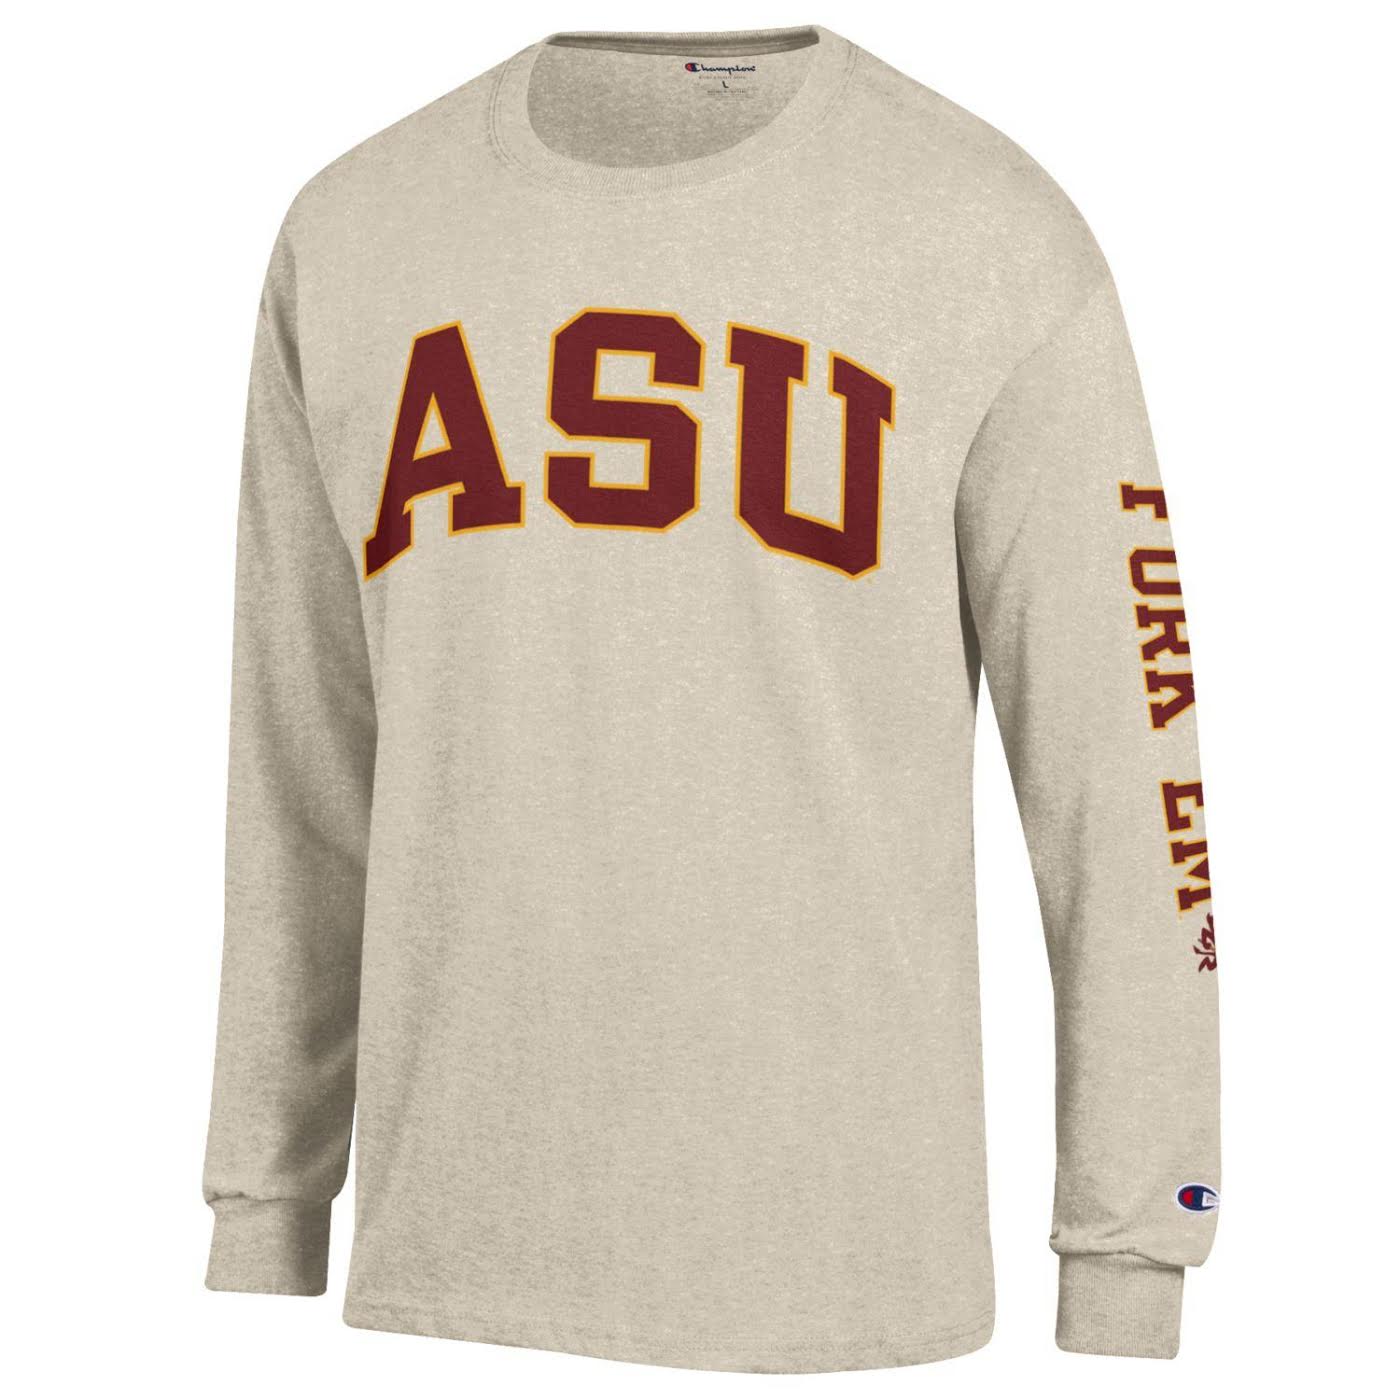 ASU oat Champion long sleeve with 'ASU' on the front and 'Fork 'um' on the left sleeve